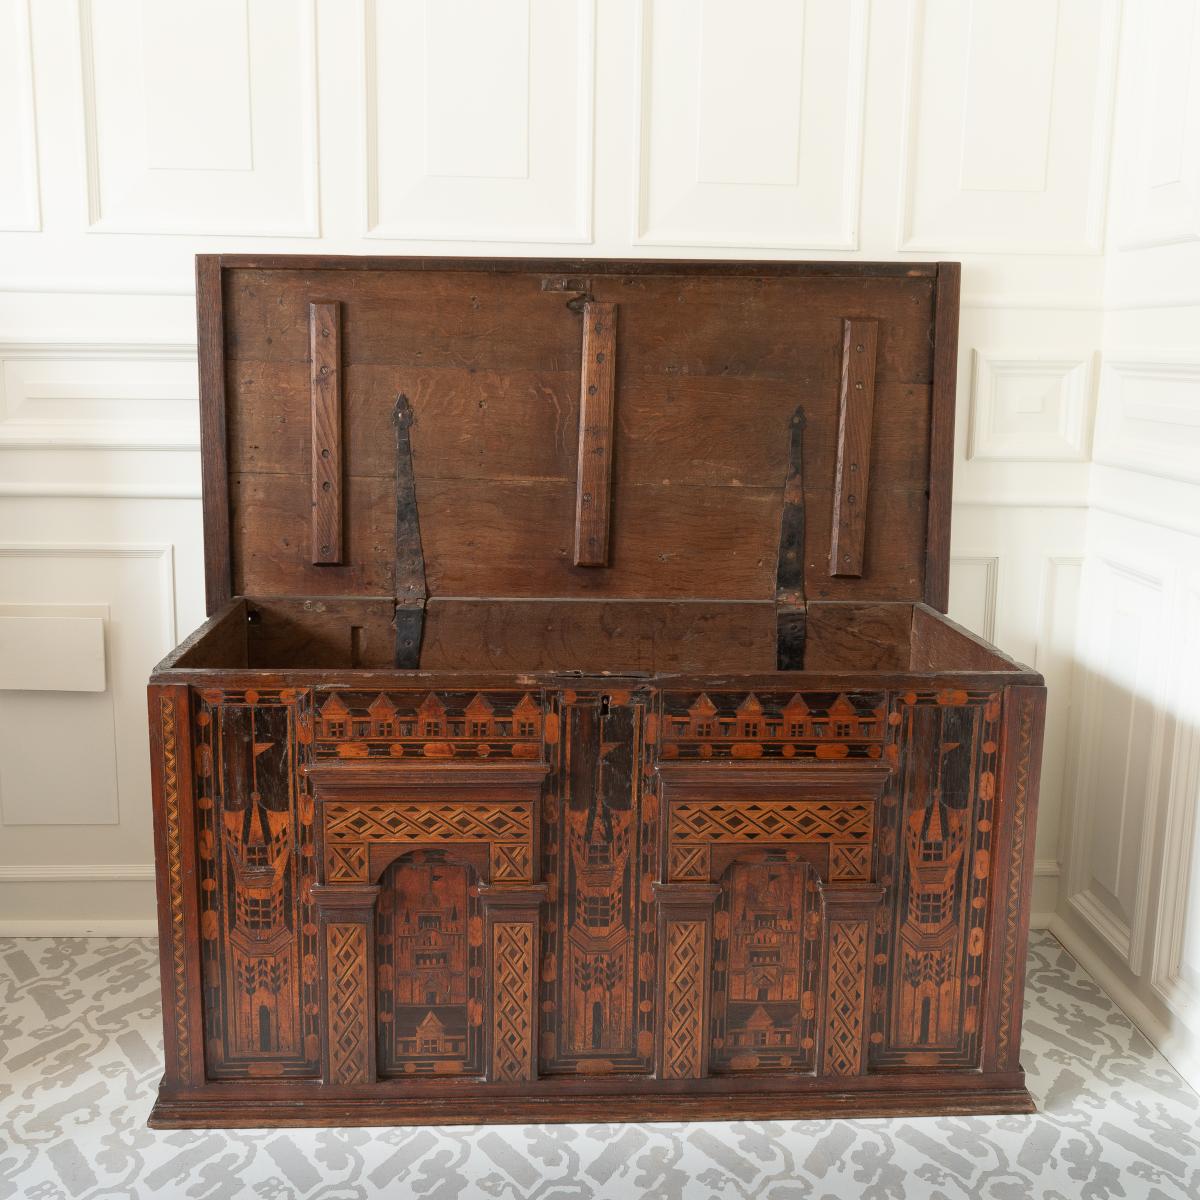 A large antique oak chest with architectural details and inlay, top open